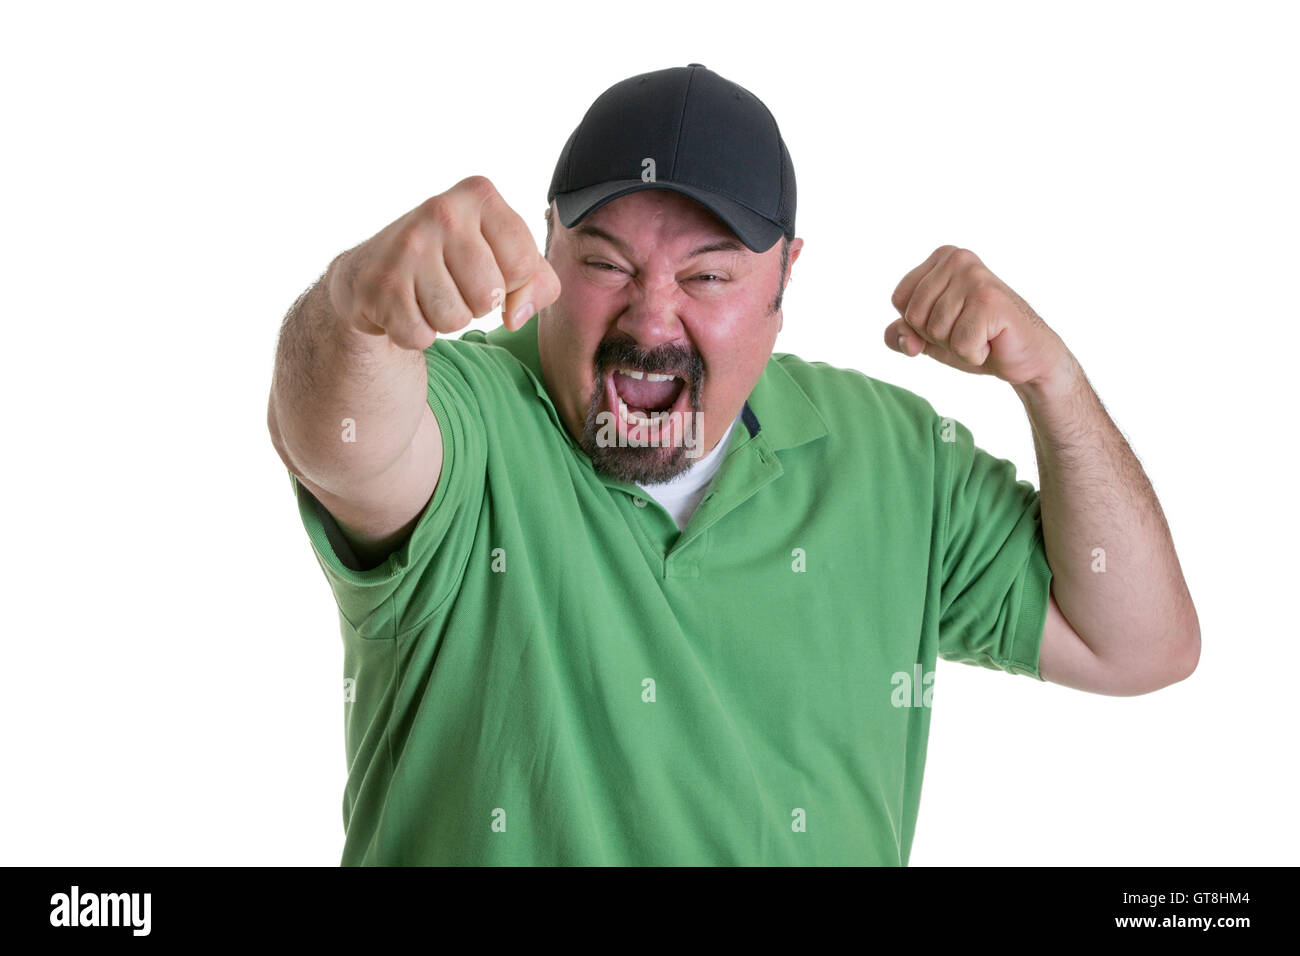 Waist Up of Excited Man with Goatee Wearing Green Shirt and Baseball Cap Holding Fists in Air and Celebrating Team Win in Studio Stock Photo